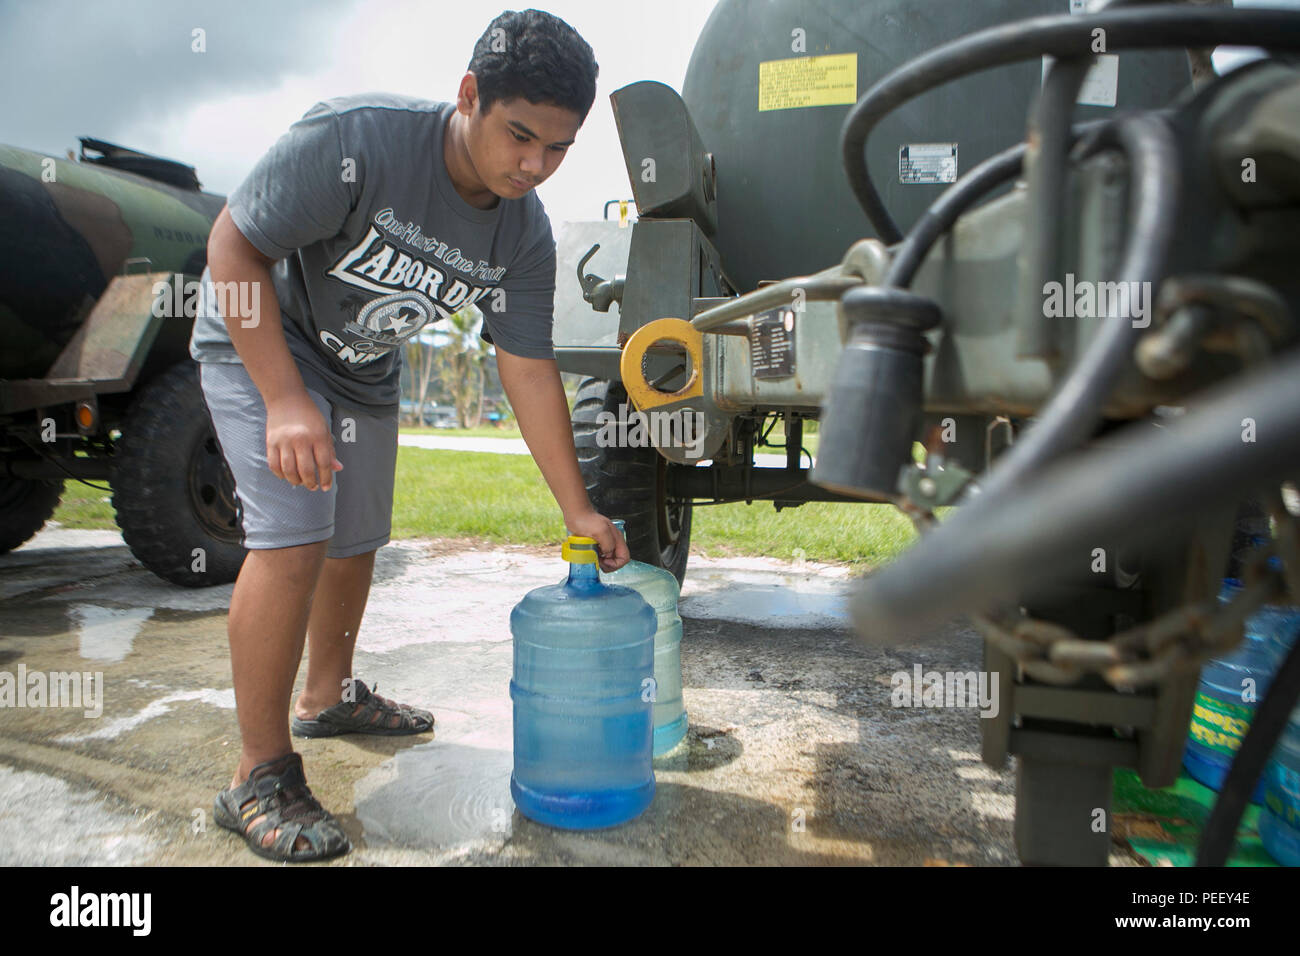 A local man fills up a water jug at a water distribution site set up by U.S. Marines from Combat Logistics Battalion 31, 31st Marin Expeditionary  Unit (MEU), as part of typhoon relief efforts in Saipan, Aug. 11, 2015. The 31st MEU and the ships of the Bonhomme Richard Amphibious Ready Group are assisting the Federal Emergency Management Agency with distributing emergency relief supplies to Saipan after the island was struck by Typhoon Soudelor Aug. 2-3. (U.S. Marine Corps photo by Lance Cpl. Brian Bekkala/Released) Stock Photo